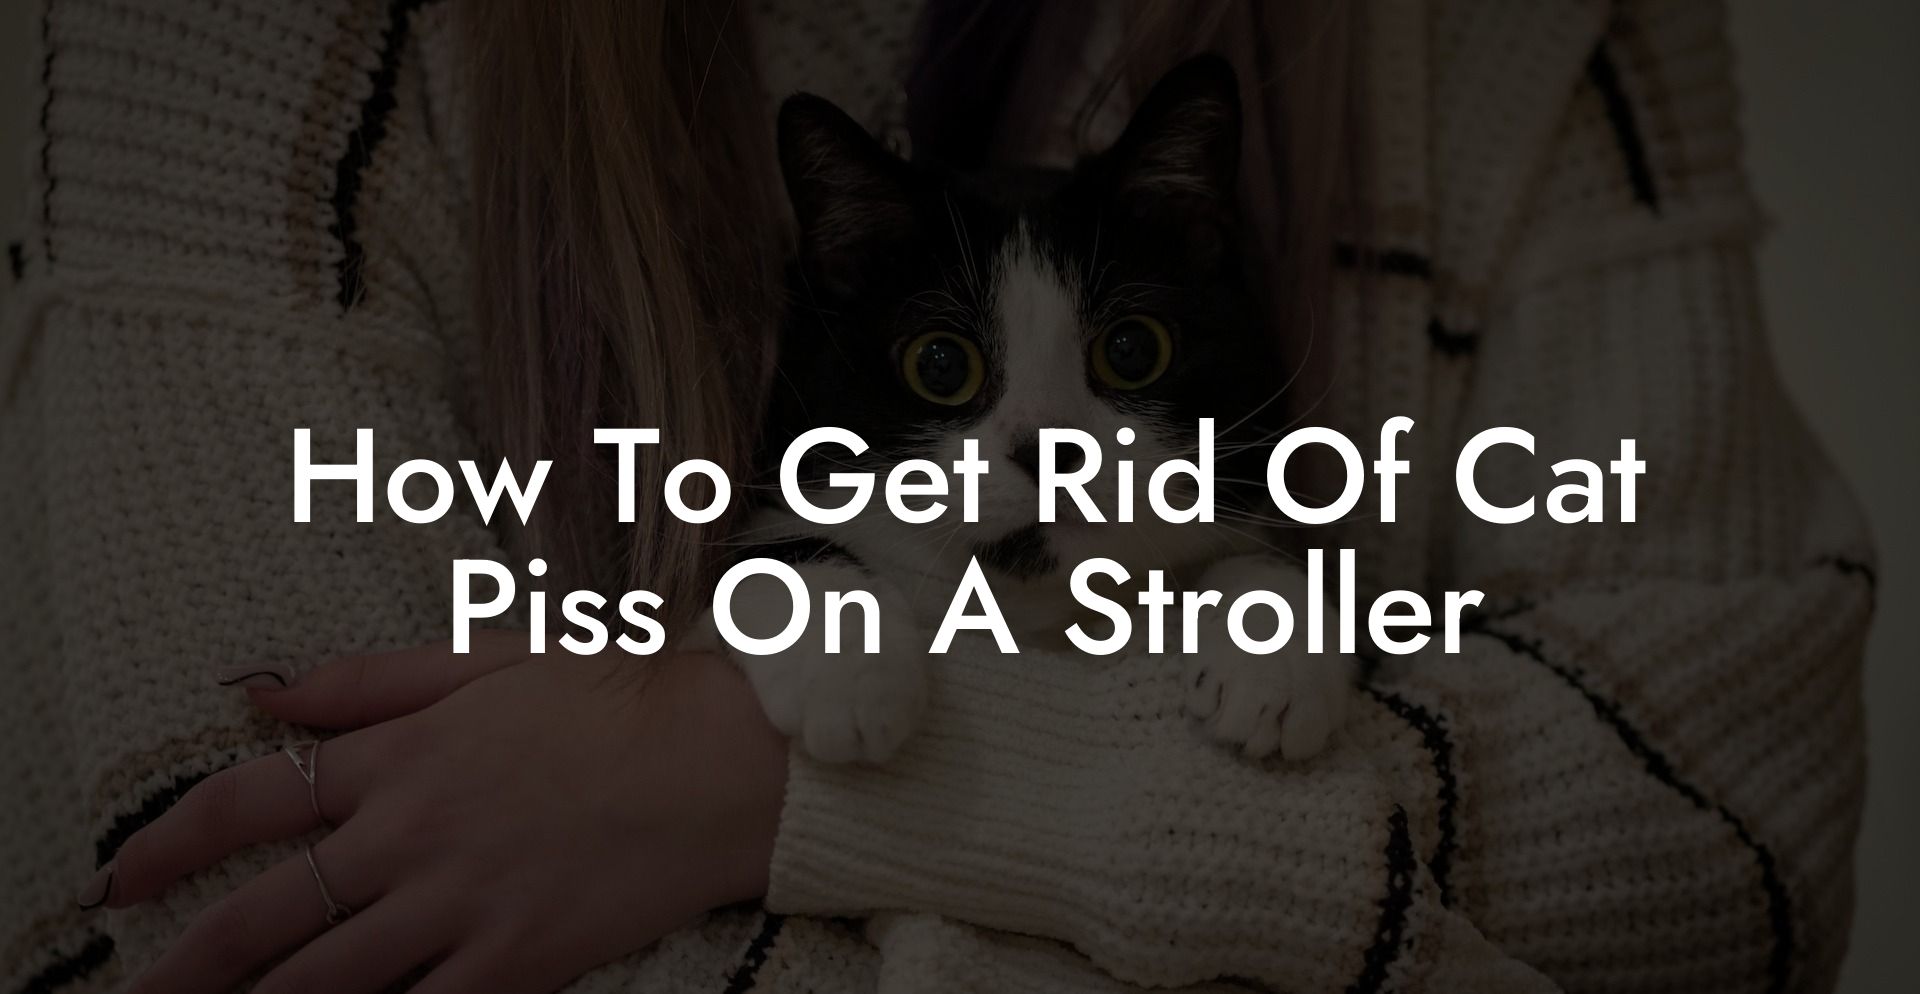 How To Get Rid Of Cat Piss On A Stroller